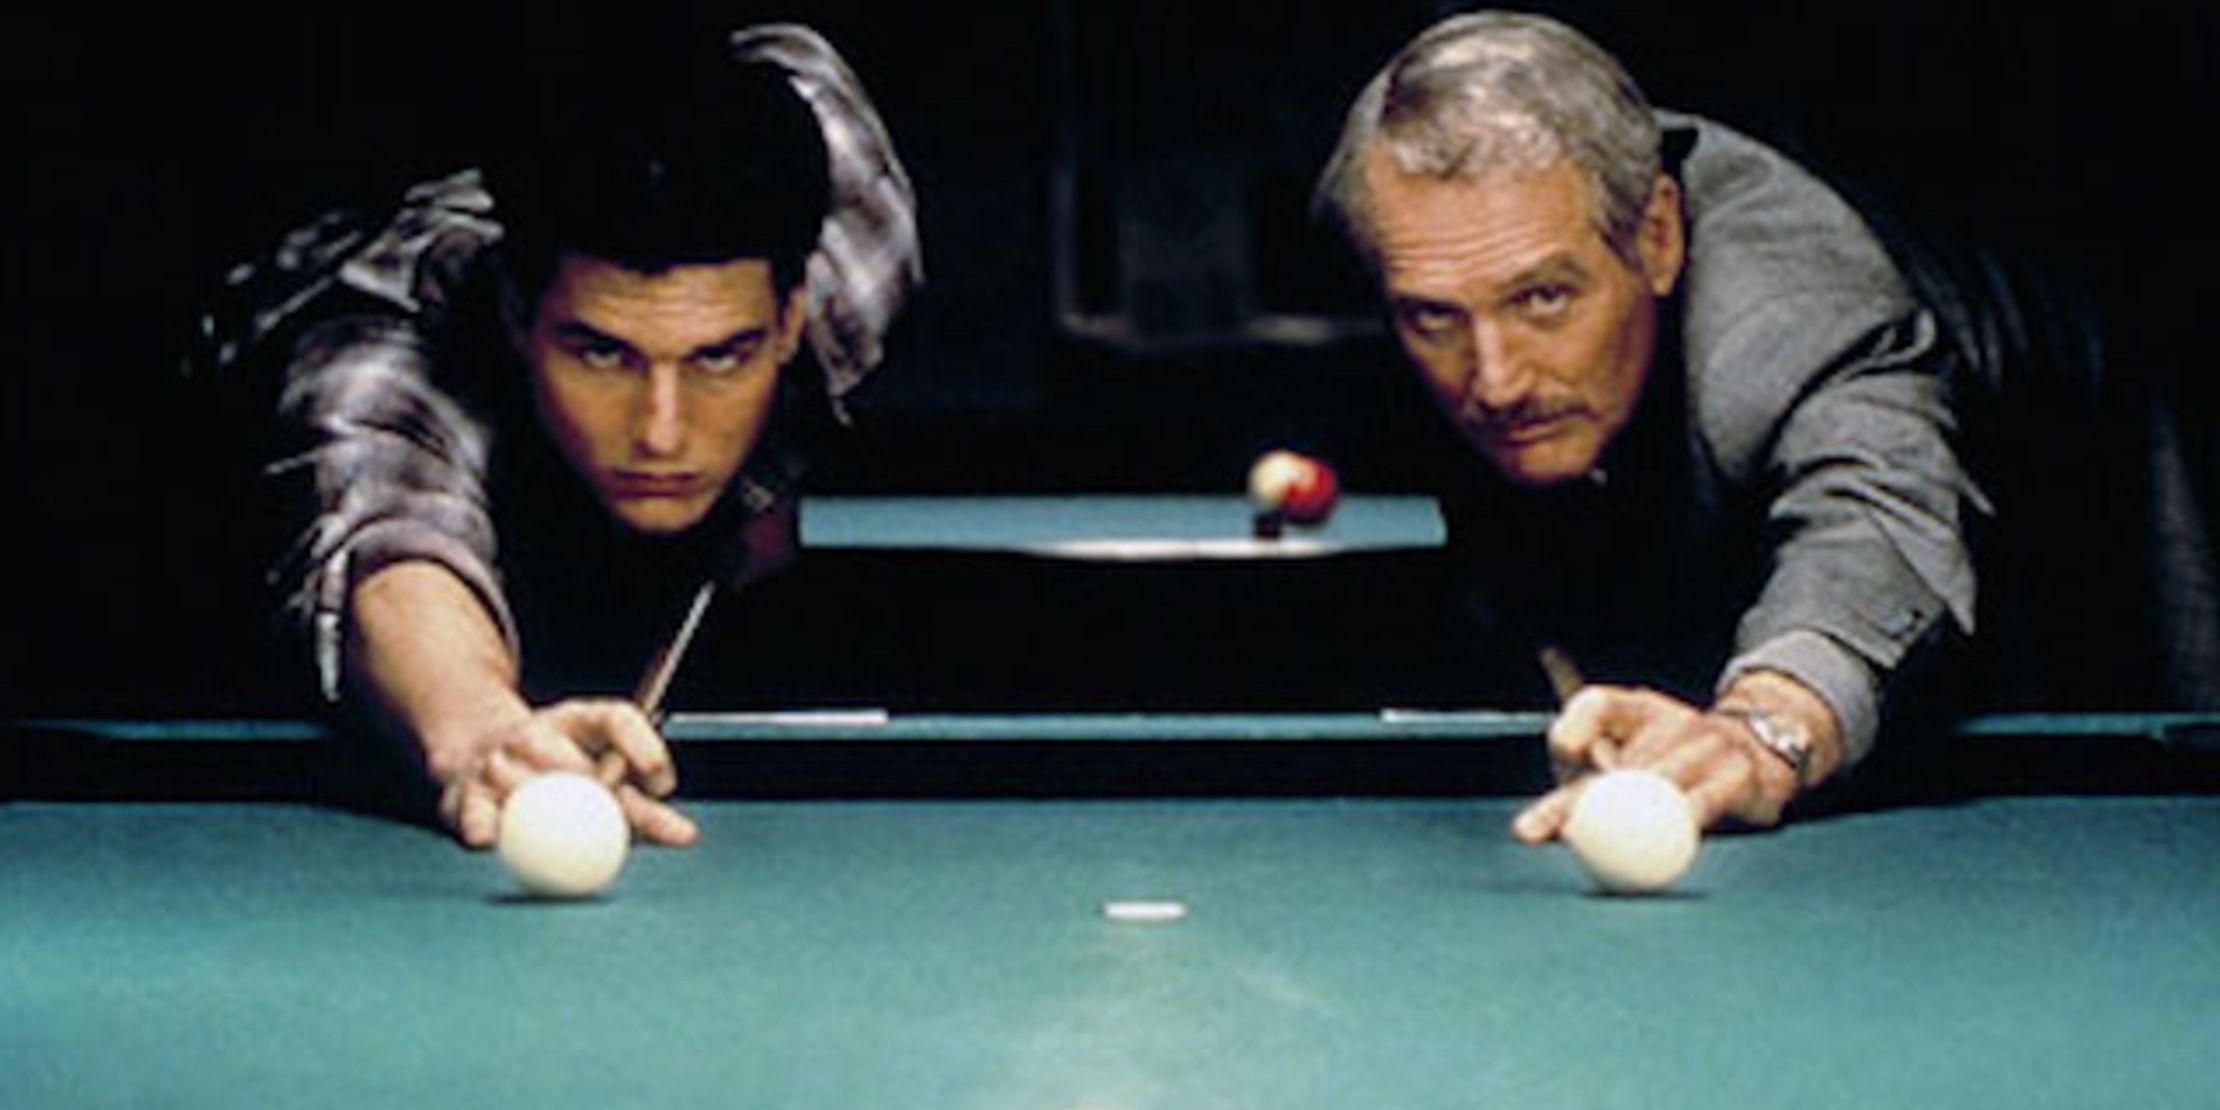 Tom Cruise and Paul Newman playing pool in The Color of Money